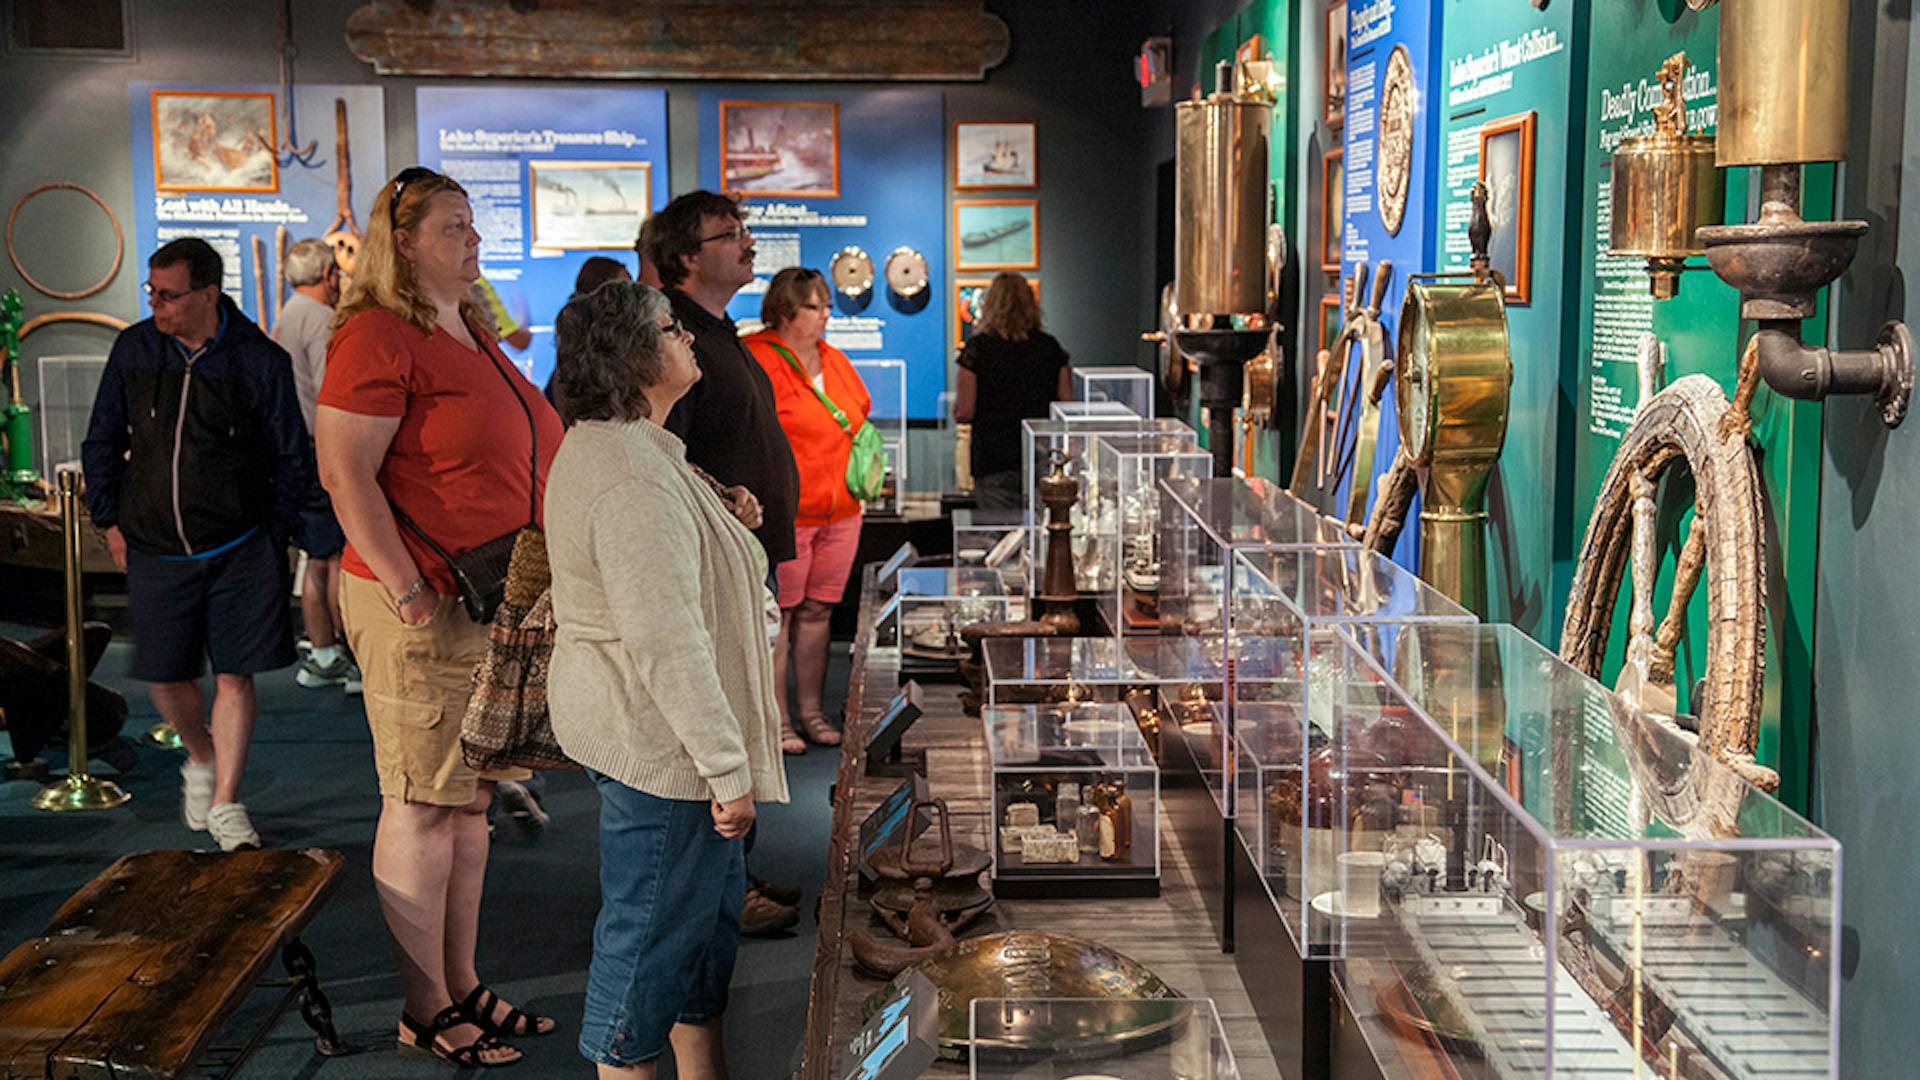 Visitors at the Great Lakes Shipwreck Museum in Paradise, Michigan (photo by GLSHS Photo)